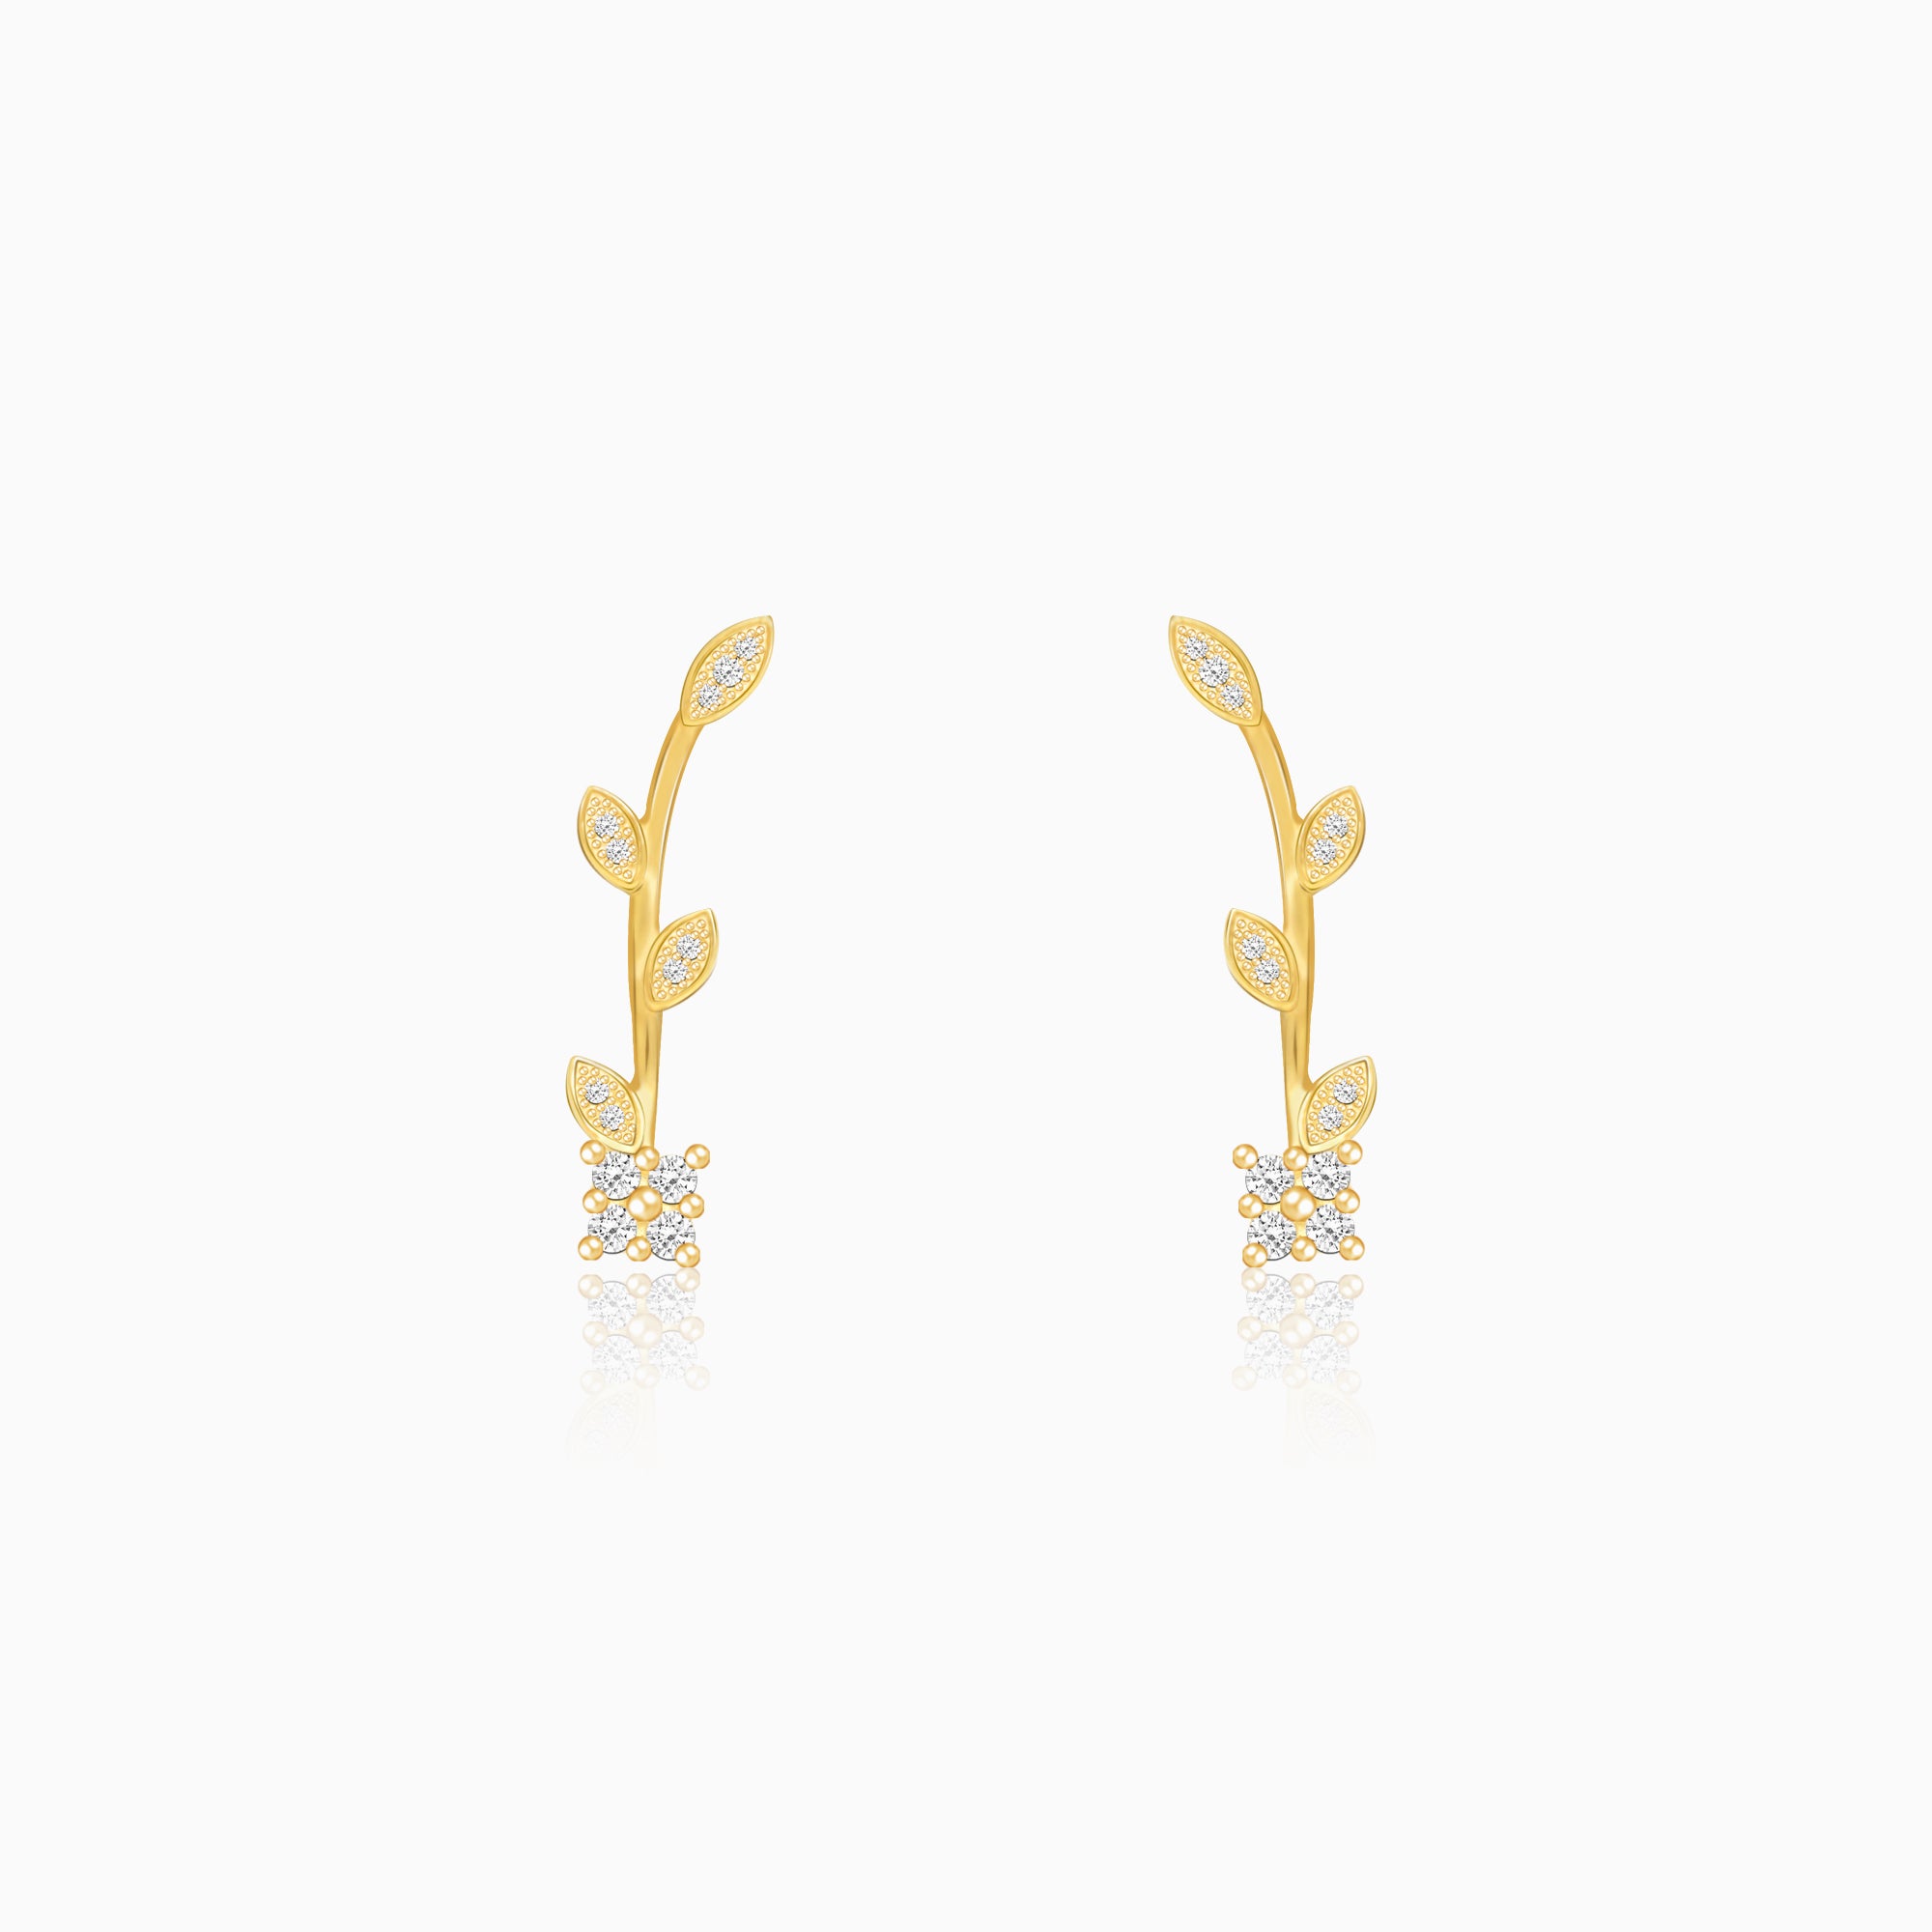 Buy 22k Cz Sparkle Gold Hanging Earrings Online from Vaibhav Jewellers